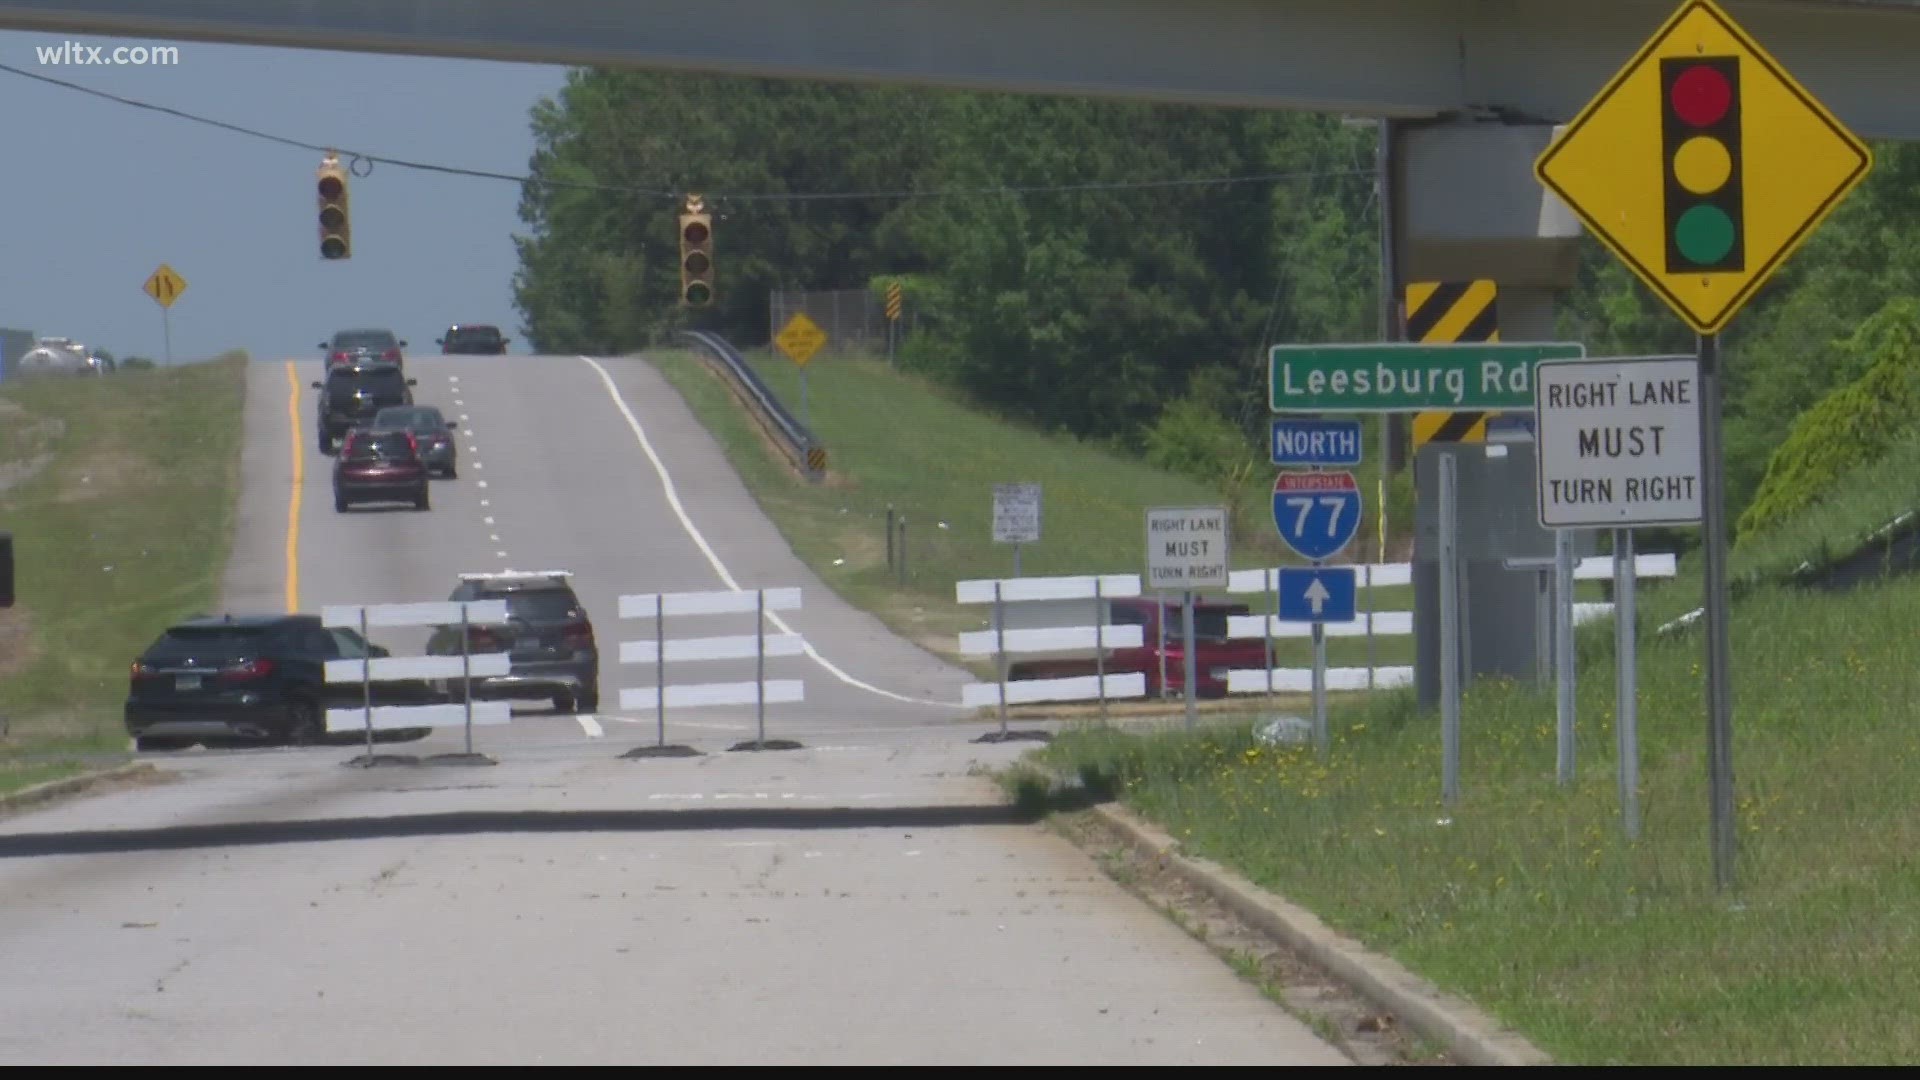 The chute allowed drivers to connect from Garners Ferry to the I-77 North ramp without going on Leesburg Road.